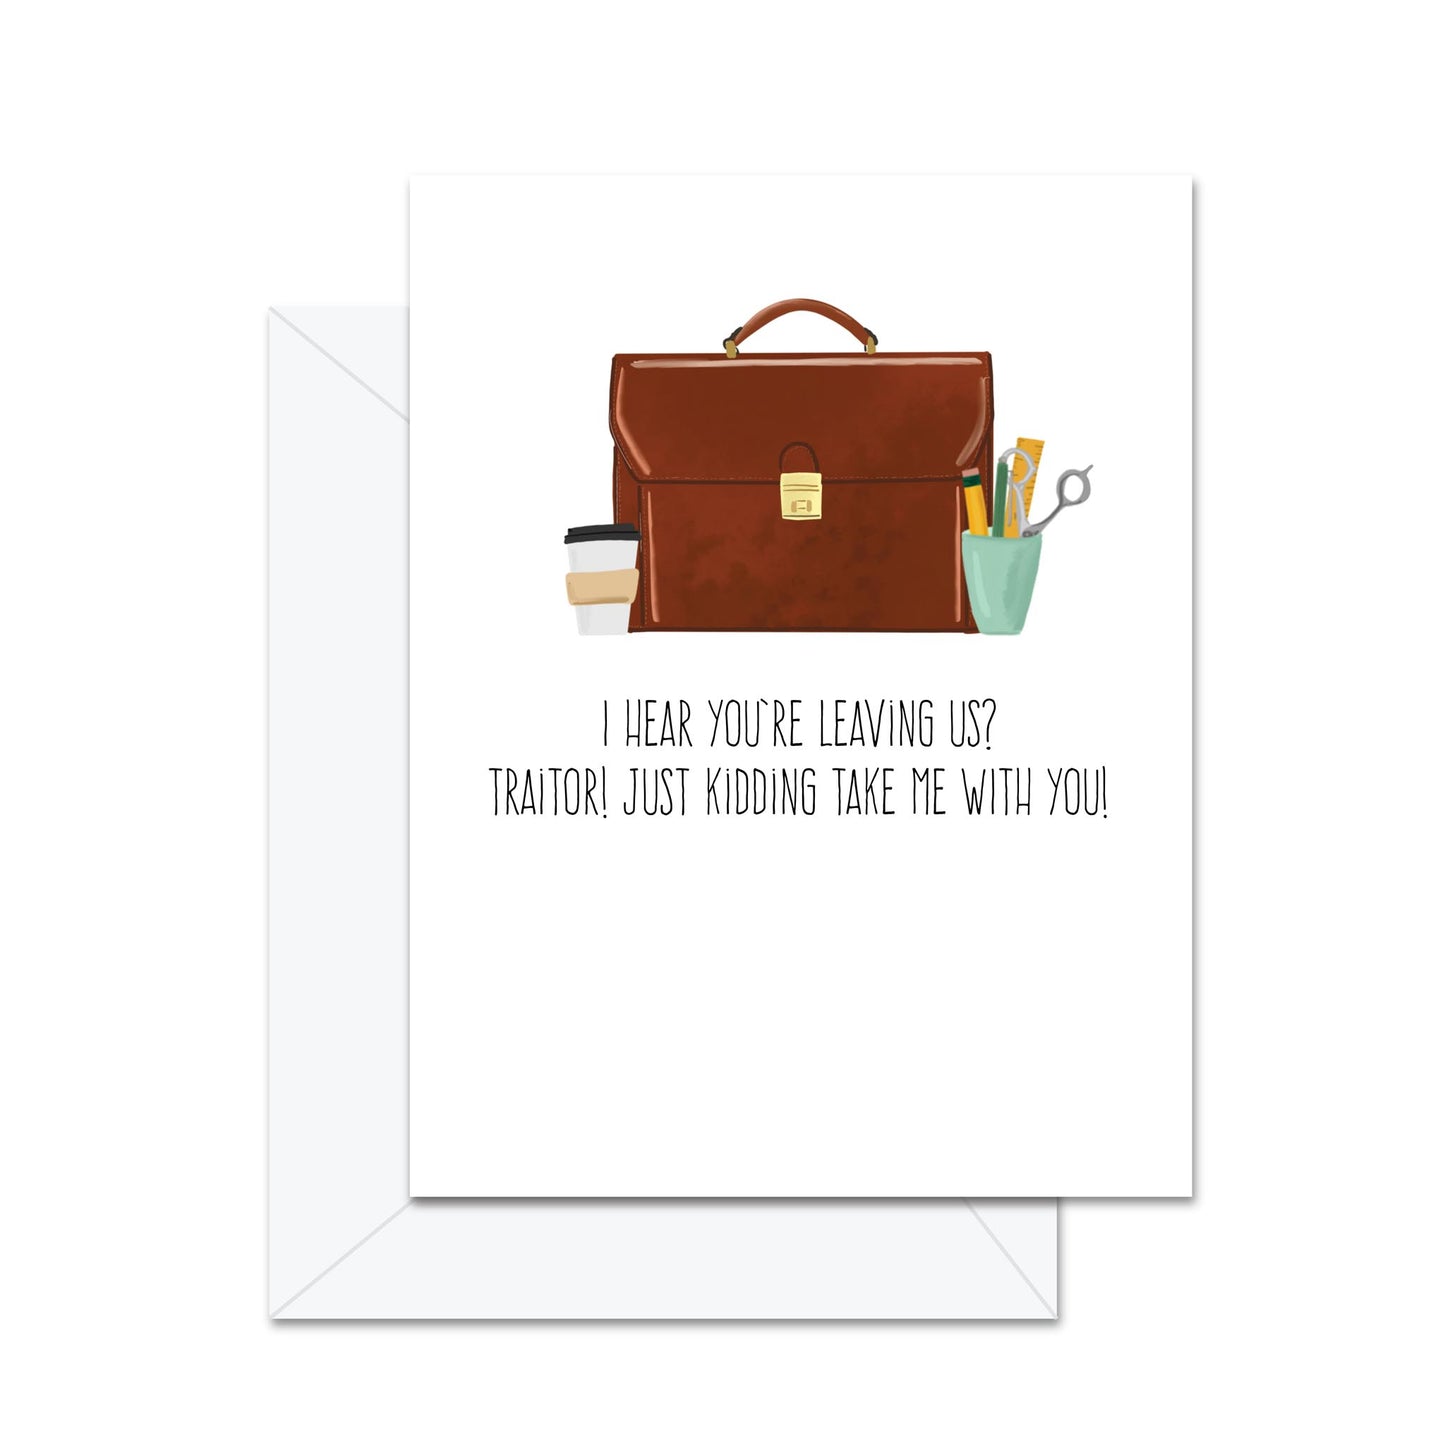 I Hear You're Leaving Us! Traitor! - Greeting Card